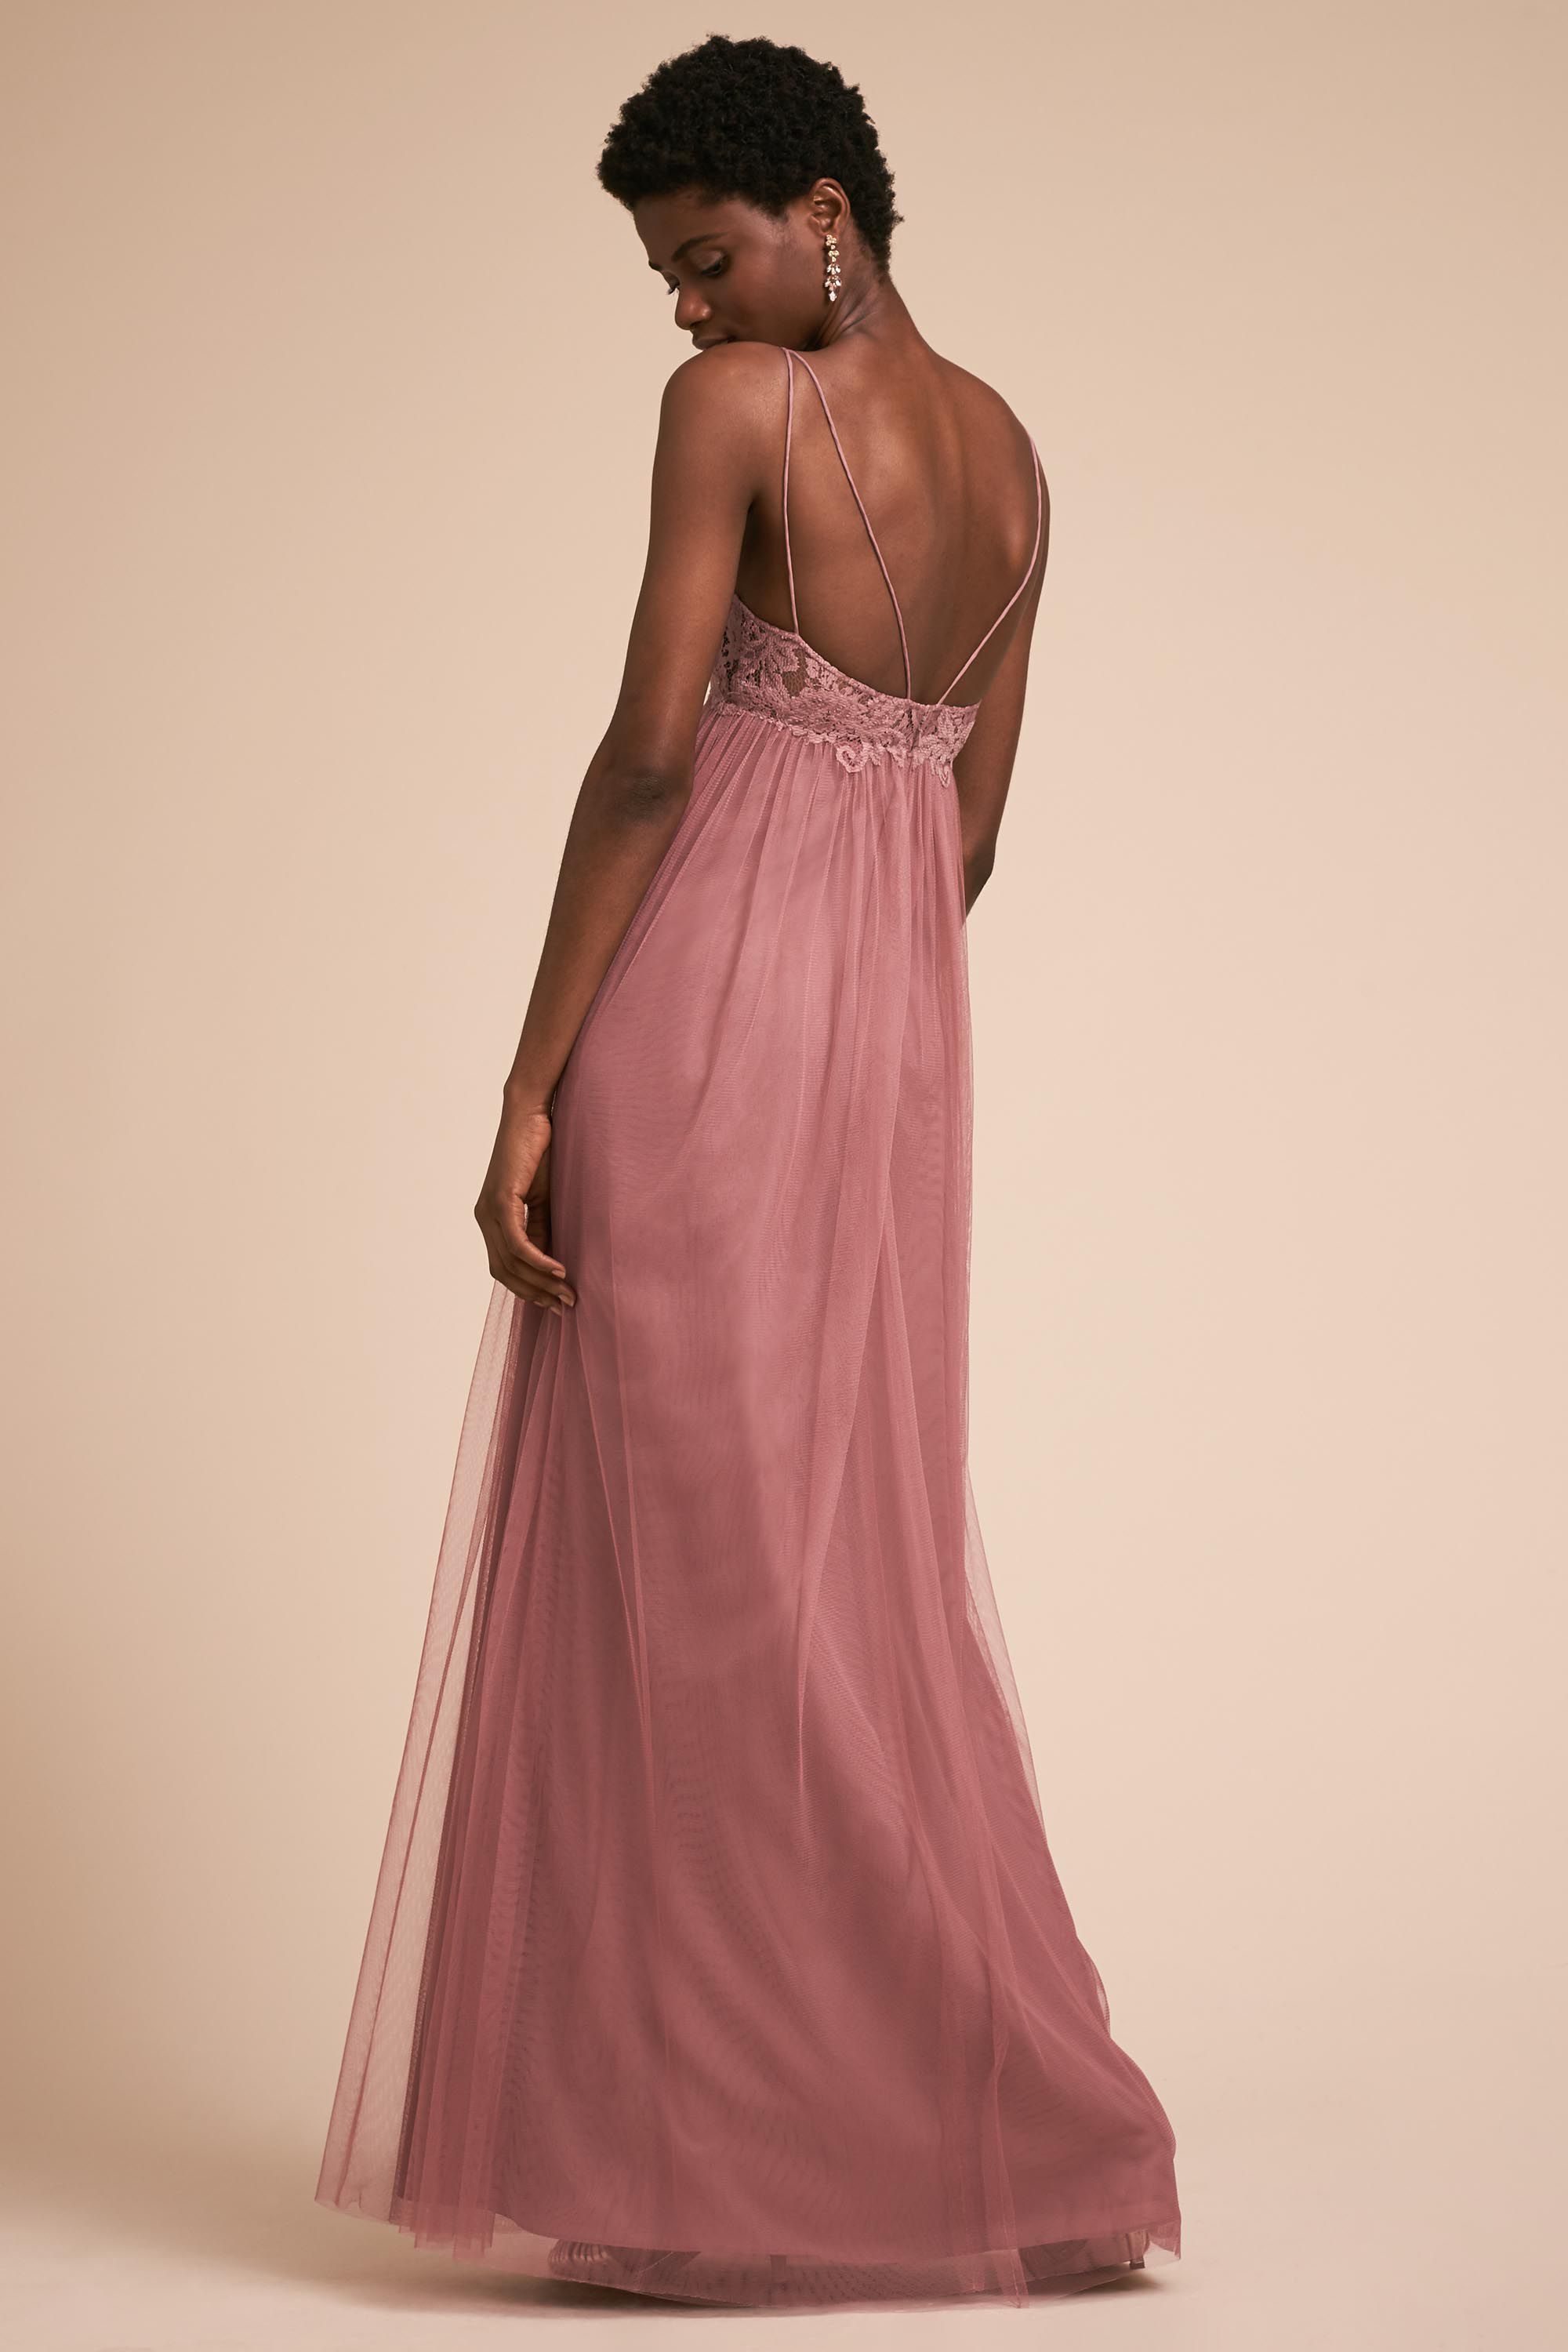 Bridesmaid Dresses & Gowns | Vintage Inspired | BHLDN